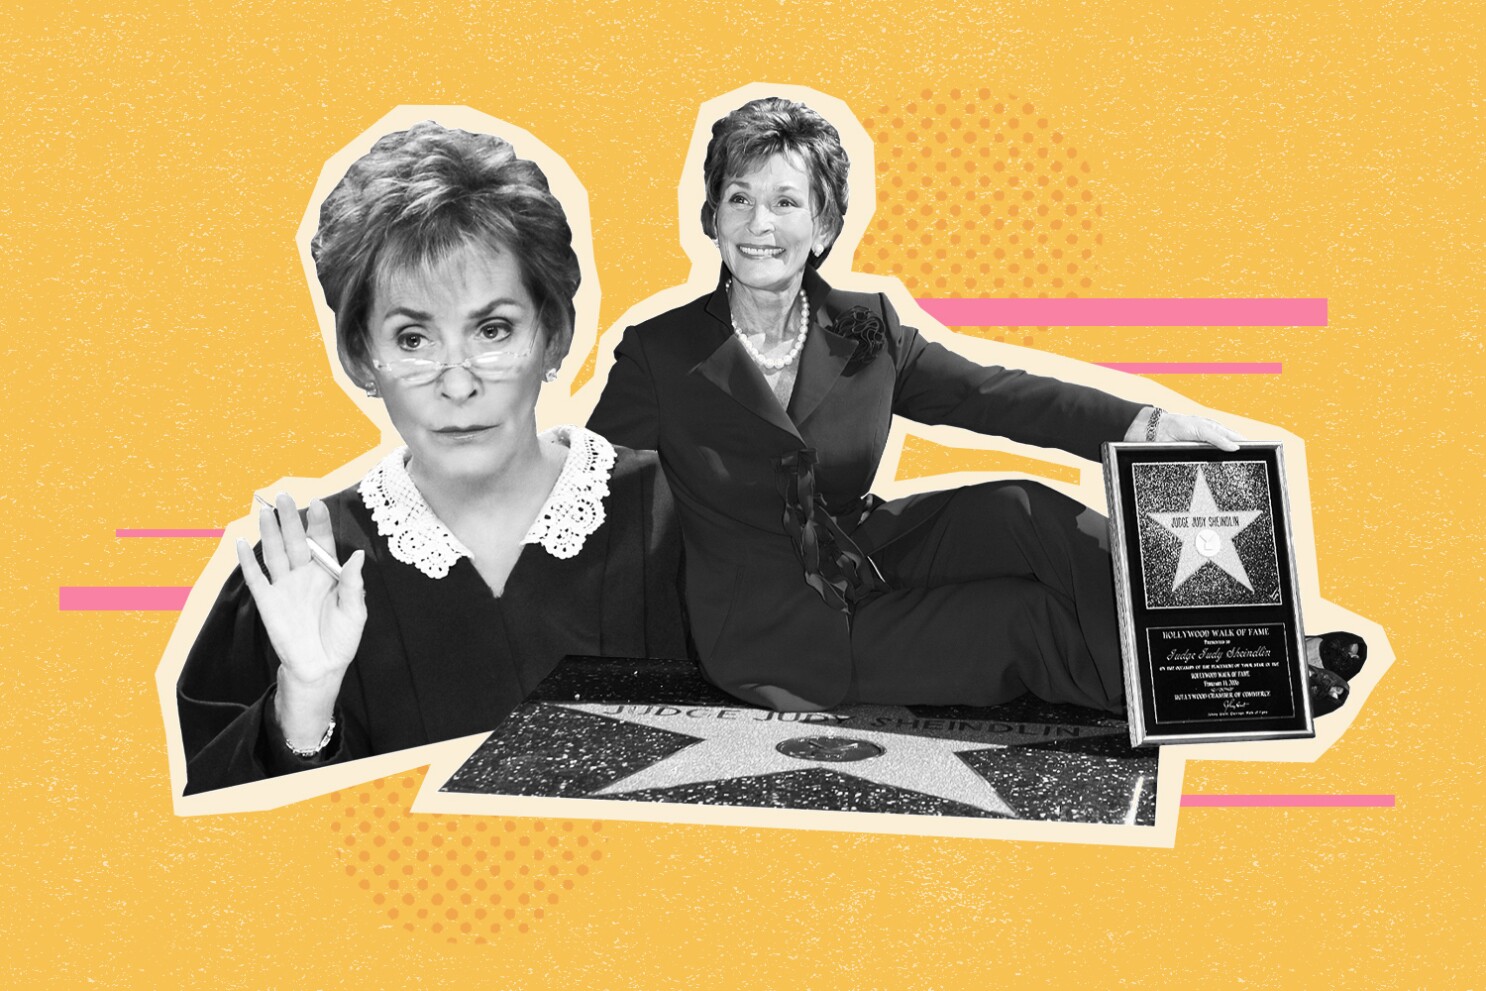 After 25 episodes, 'Judge Judy' says goodbye - Angeles Times